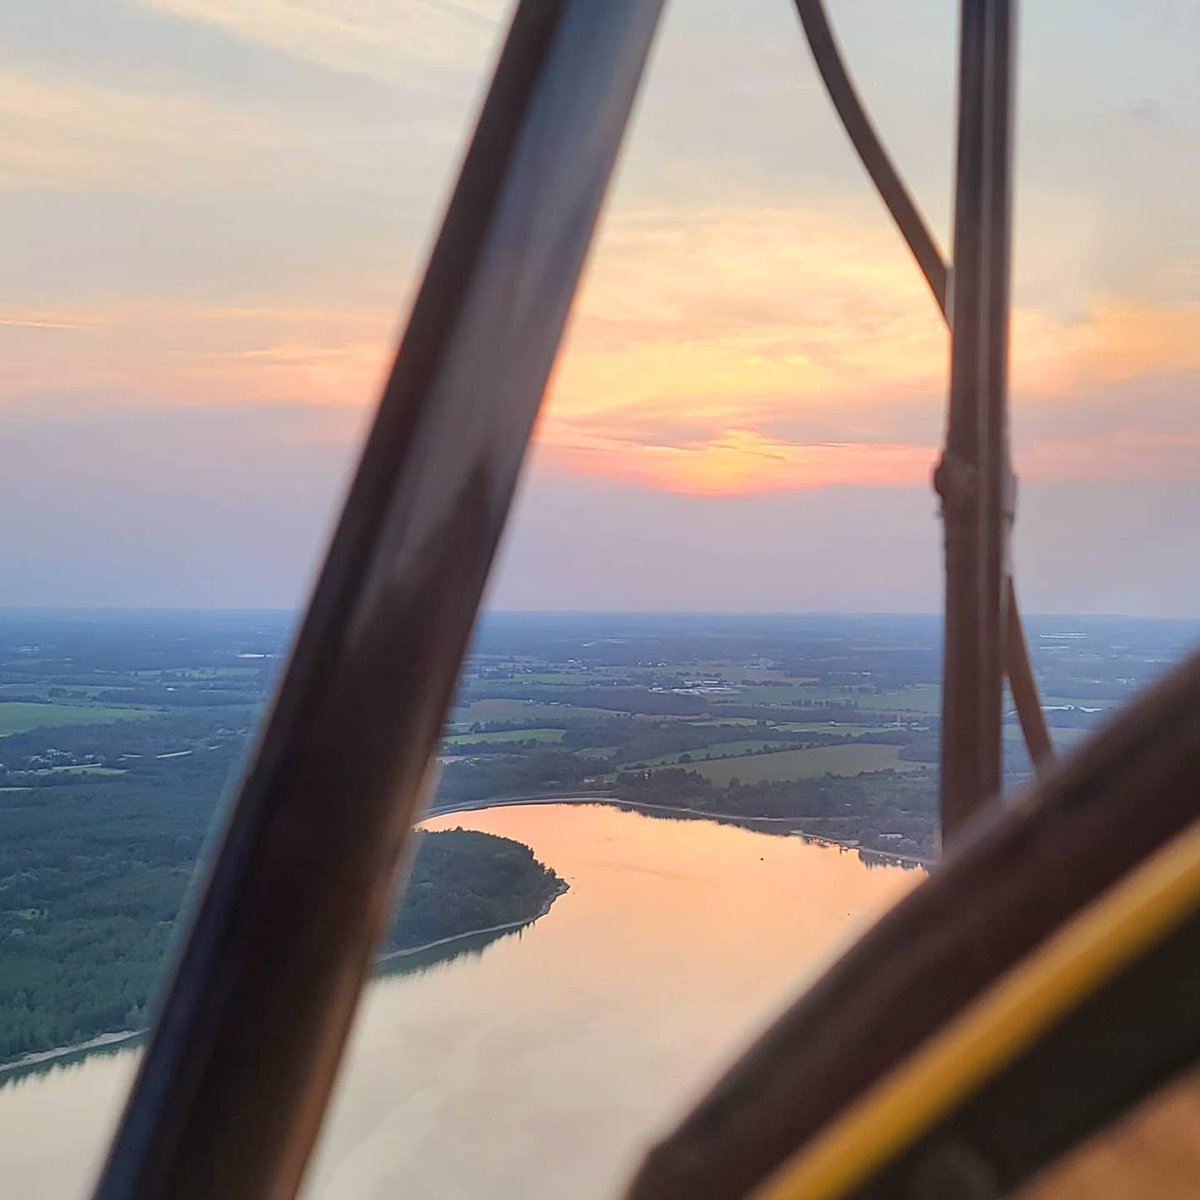 I completely unexpectedly ended up going flying in a 1941 #deHavillandTigerMoth yesterday after work! What an experience! #AvGeek #BucketList